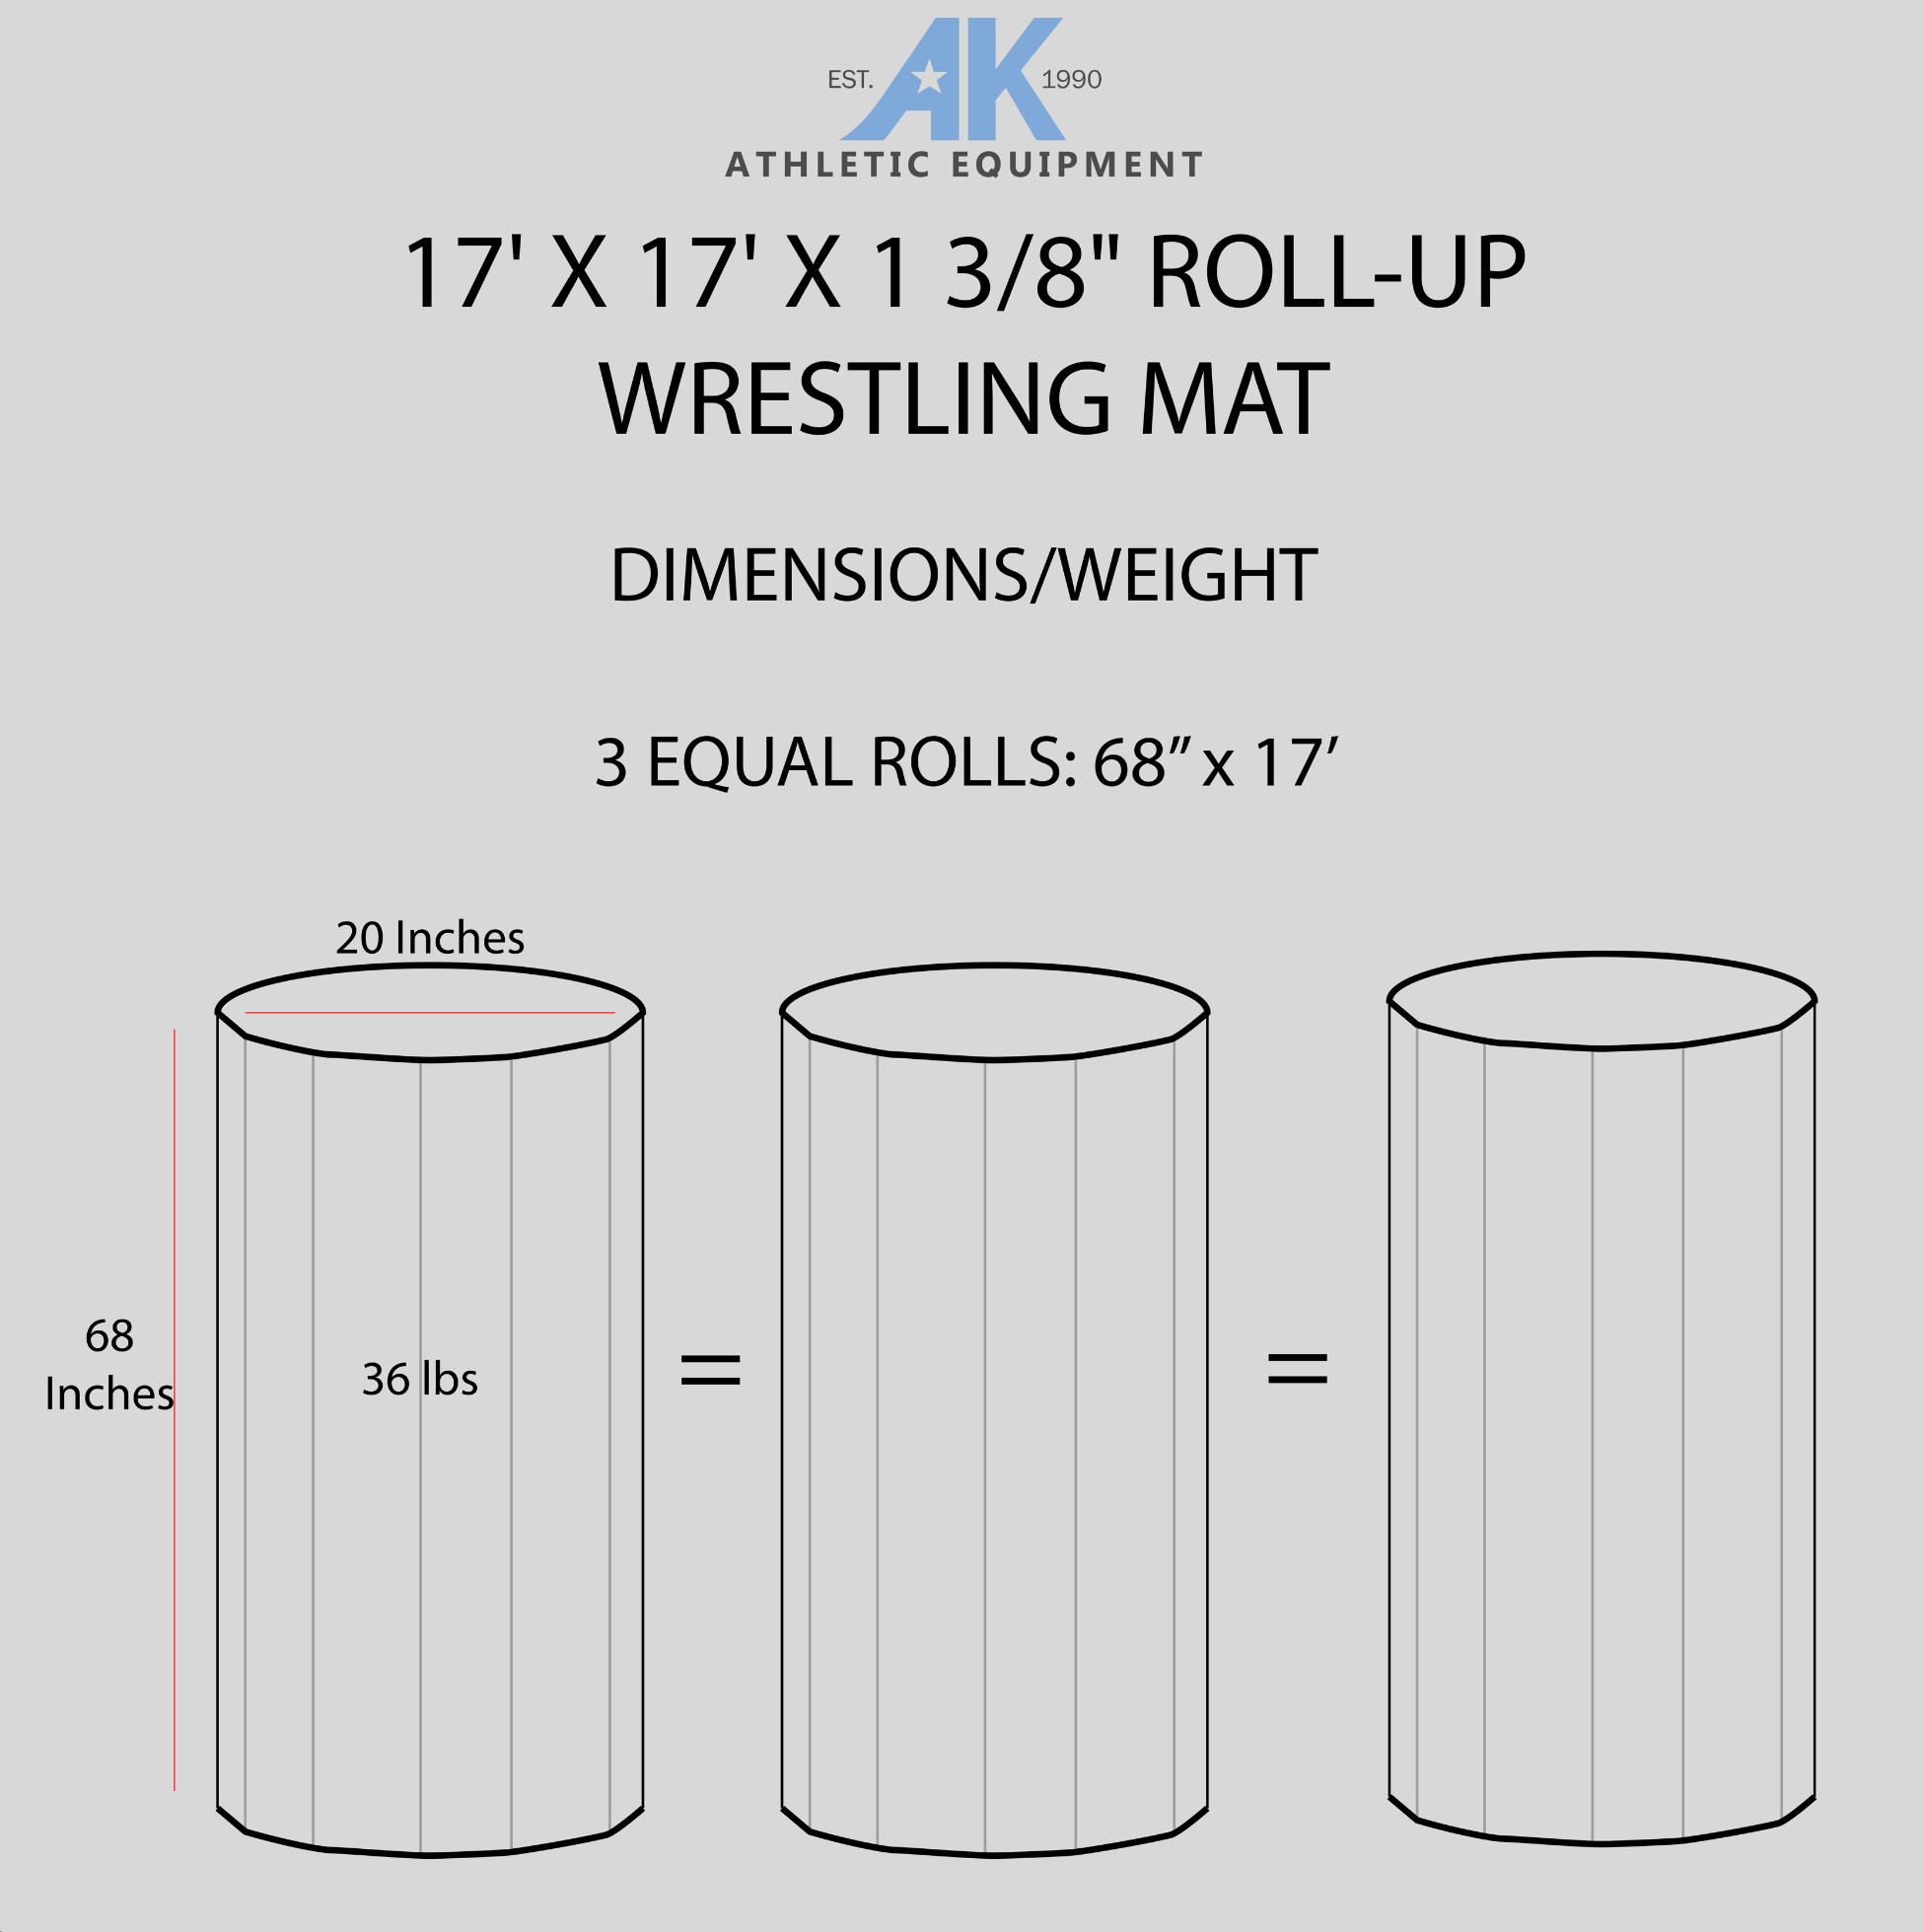 AK Athletics' mats are great for transport and reusing. Wrestling mat dimensional storage sheet help our customers plan for their perfect training space. 